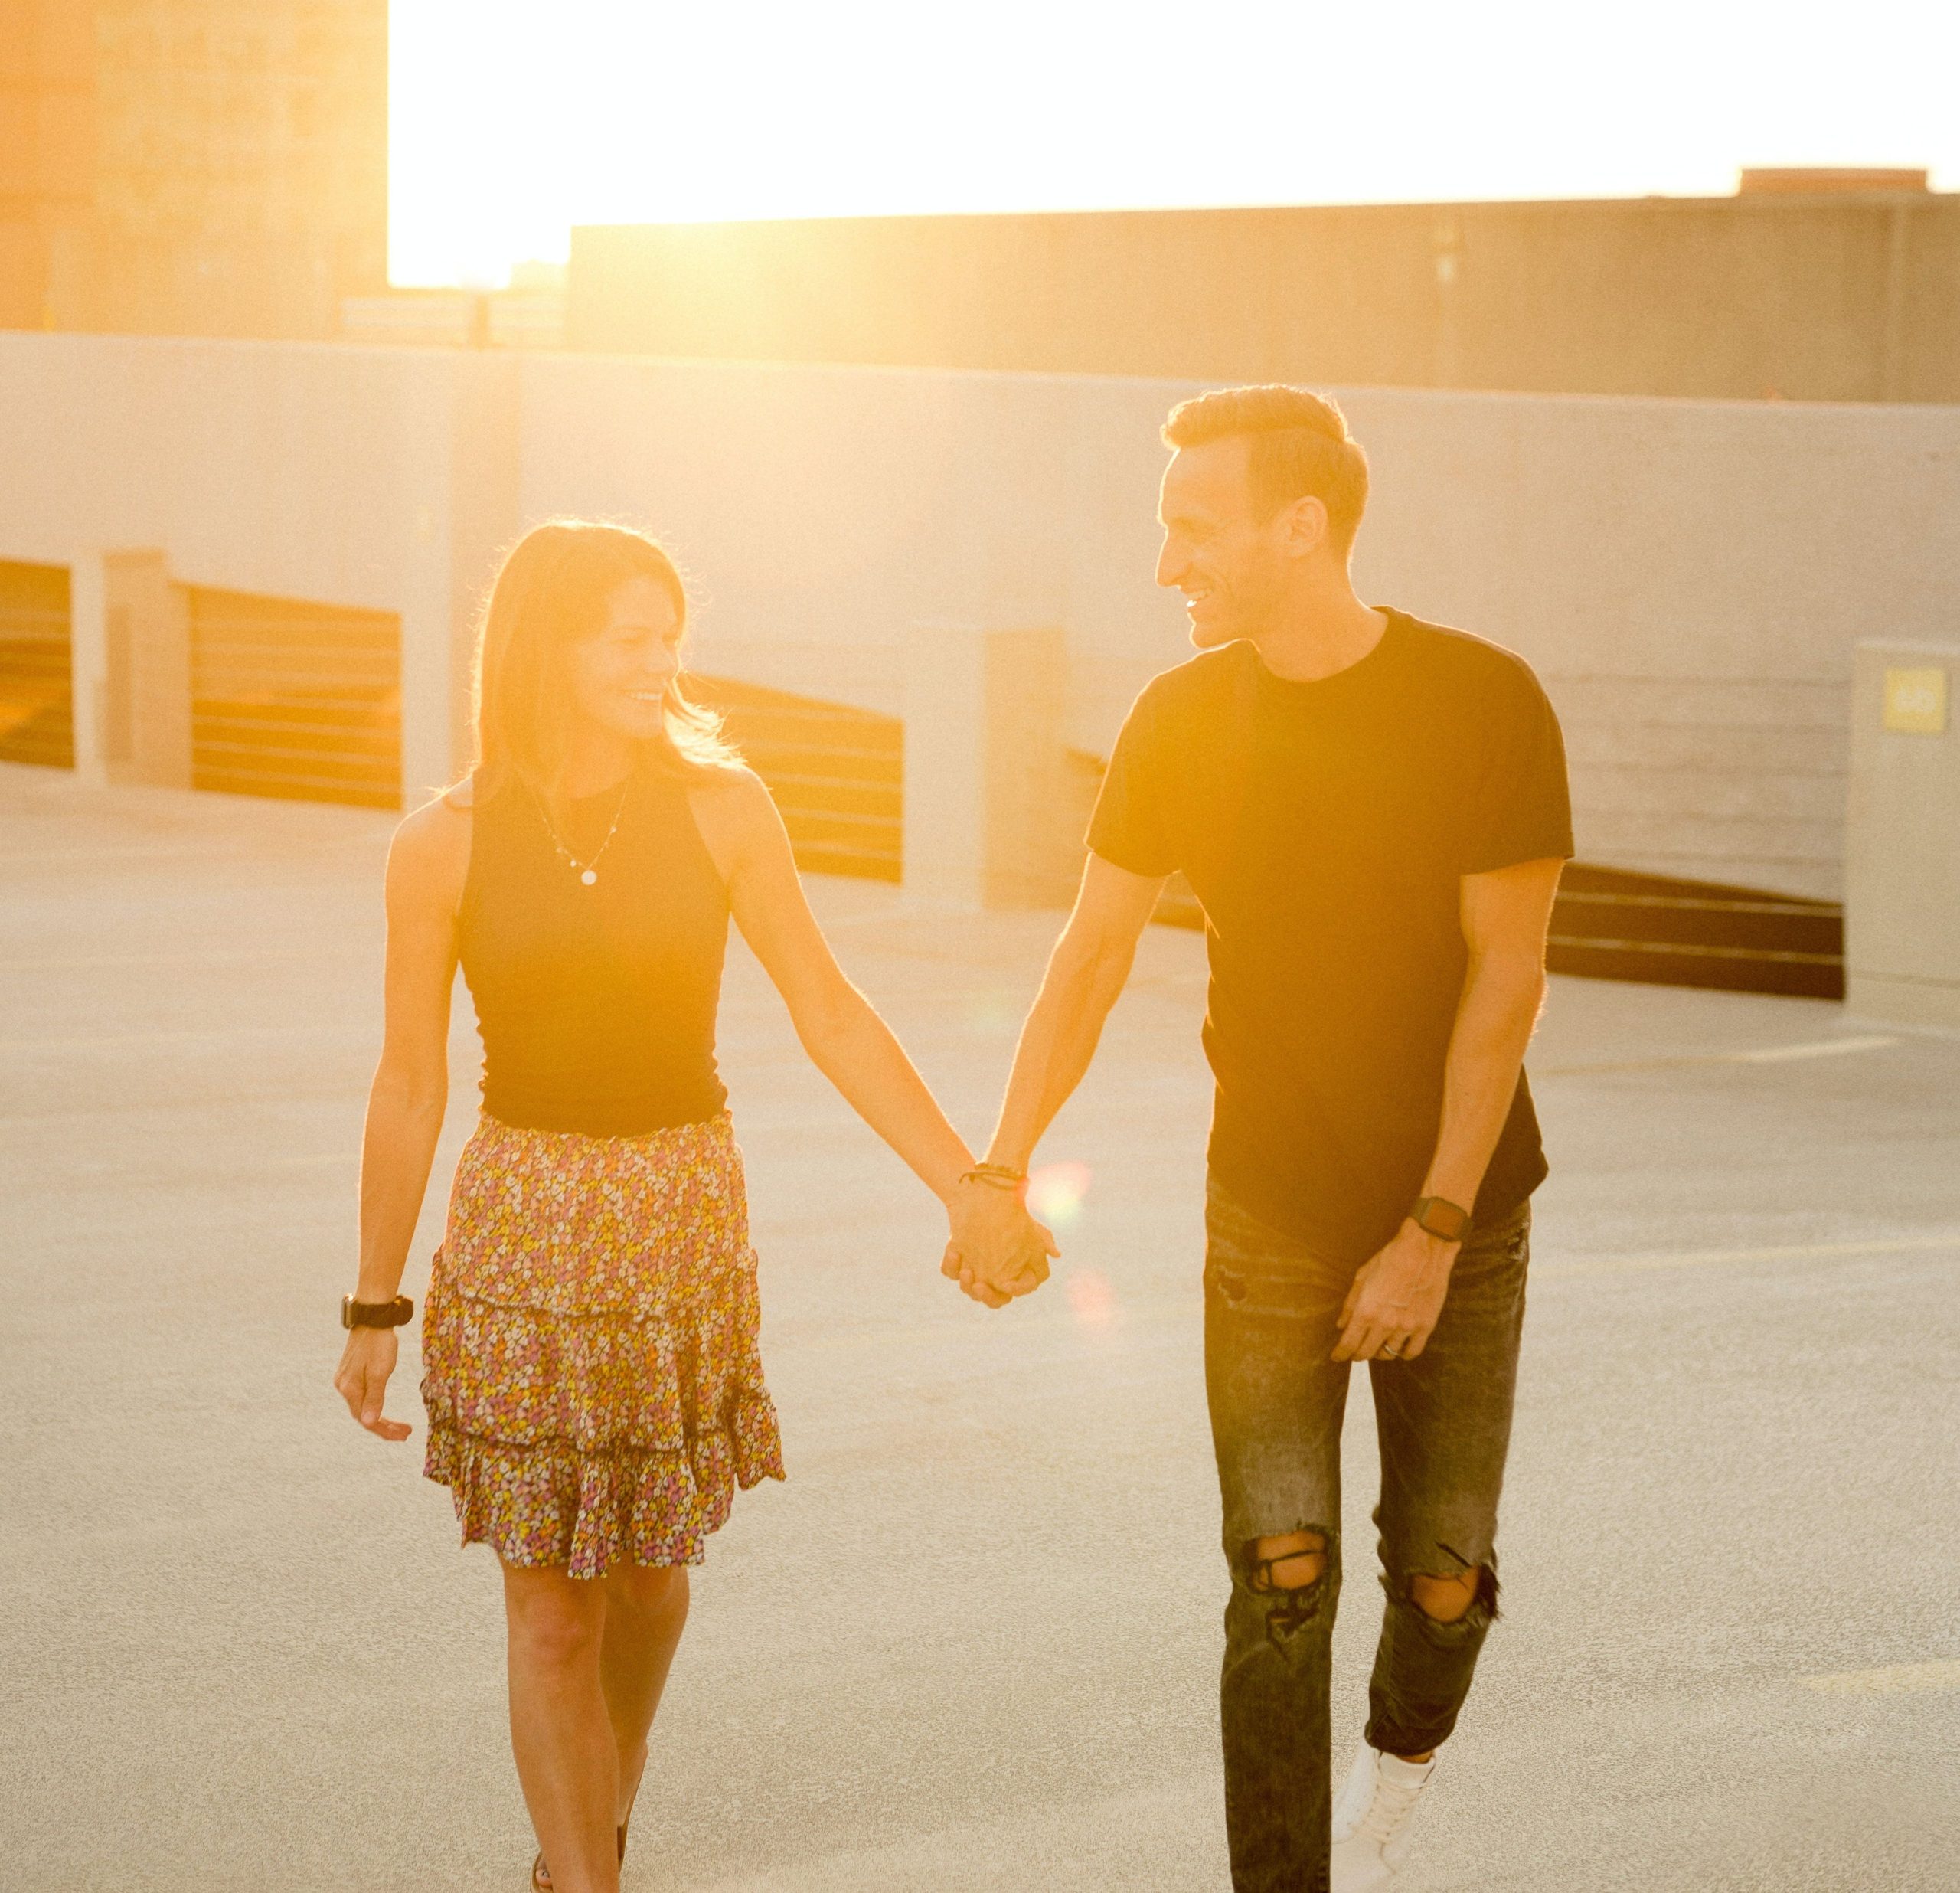 11 Brutal Truths About Modern Dating That Are Hard To Hear